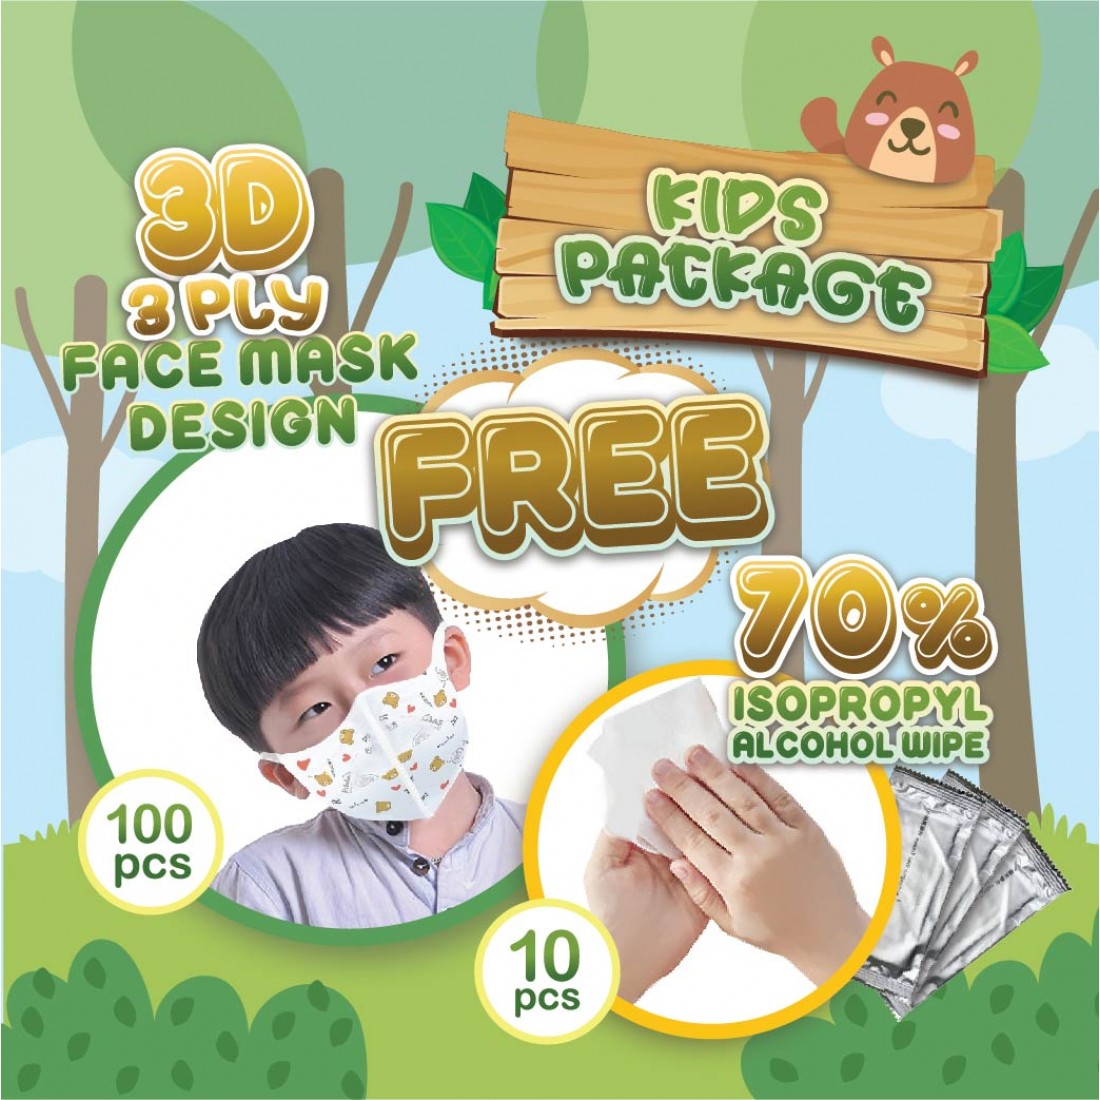 Kids Package 1- 3D 3Ply Face Mask